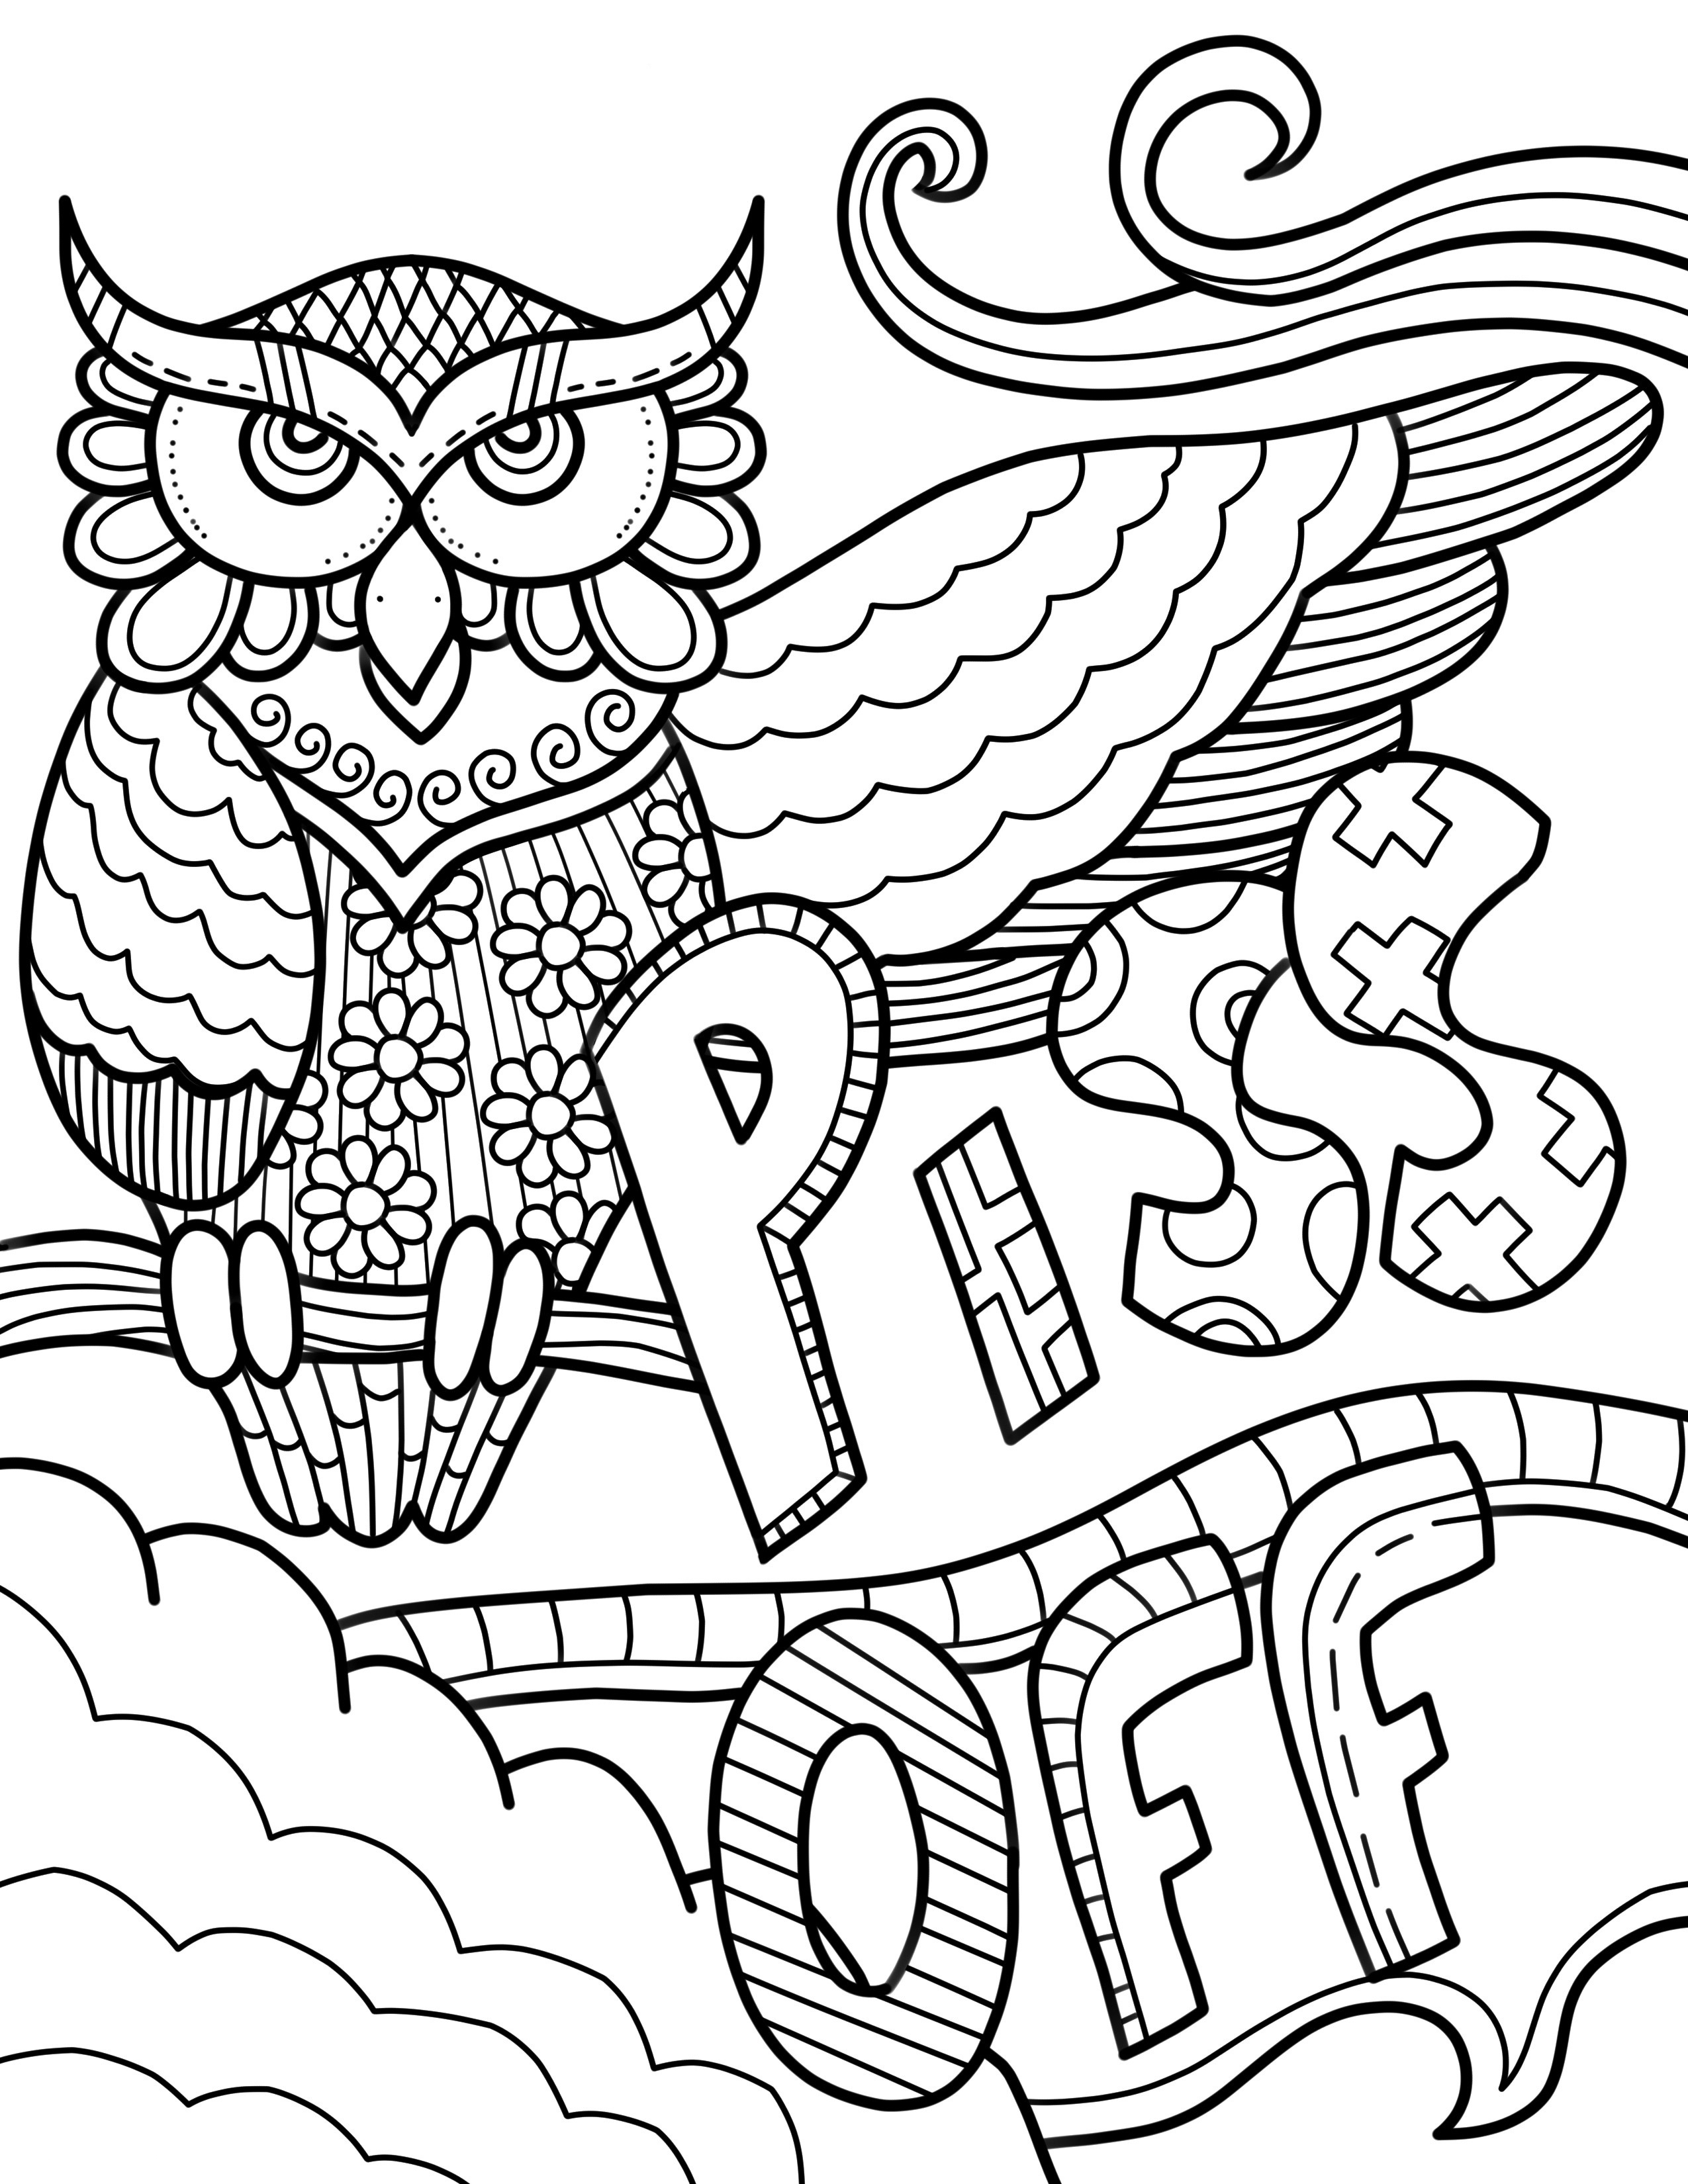 Swear Word Coloring Pages - Best Coloring Pages For Kids - Free Printable Swear Word Coloring Pages